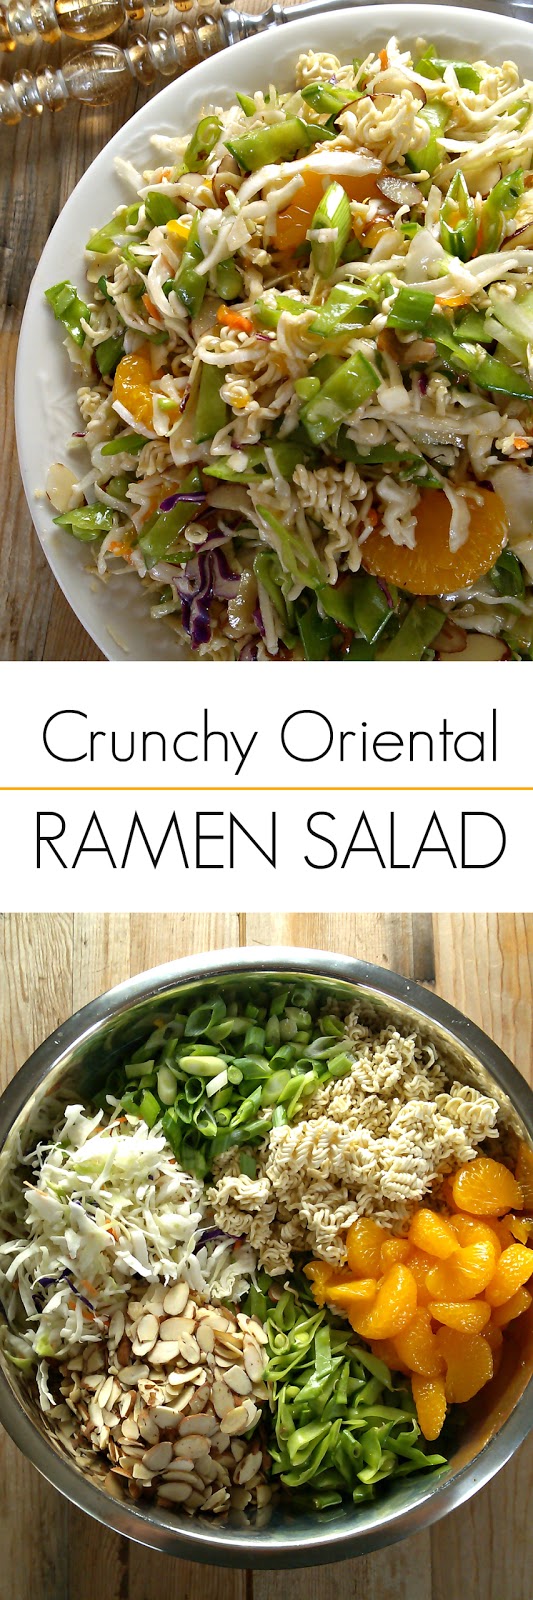 Crunchy Oriental Ramen Salad using coleslaw mix and ramen noodles! This retro Asian inspired salad is always a hit!